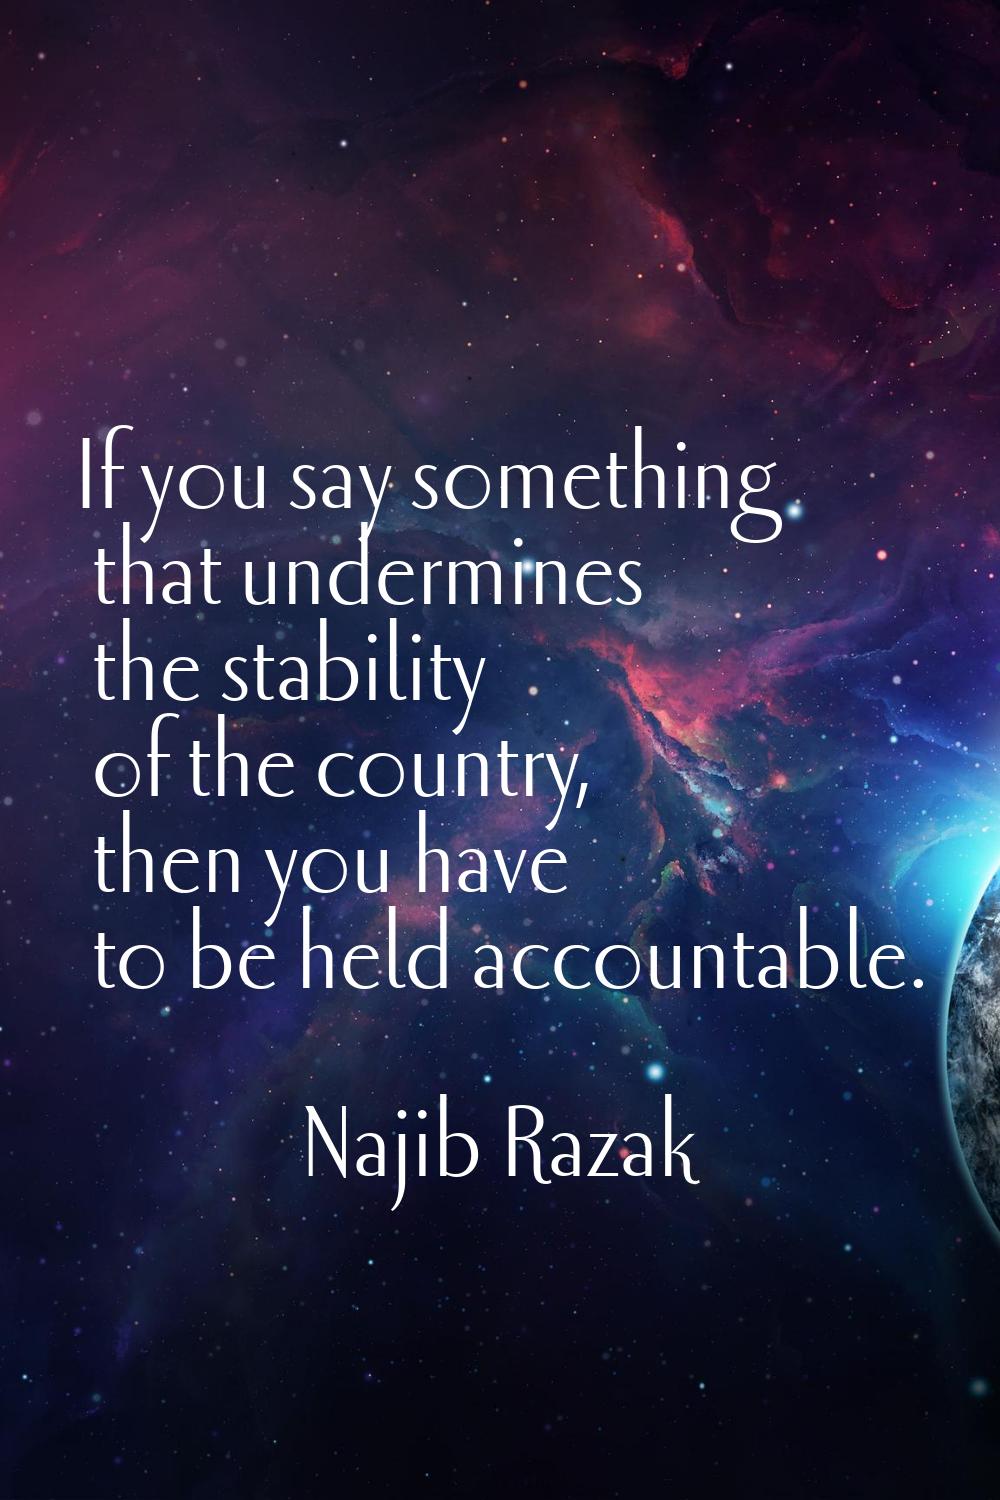 If you say something that undermines the stability of the country, then you have to be held account